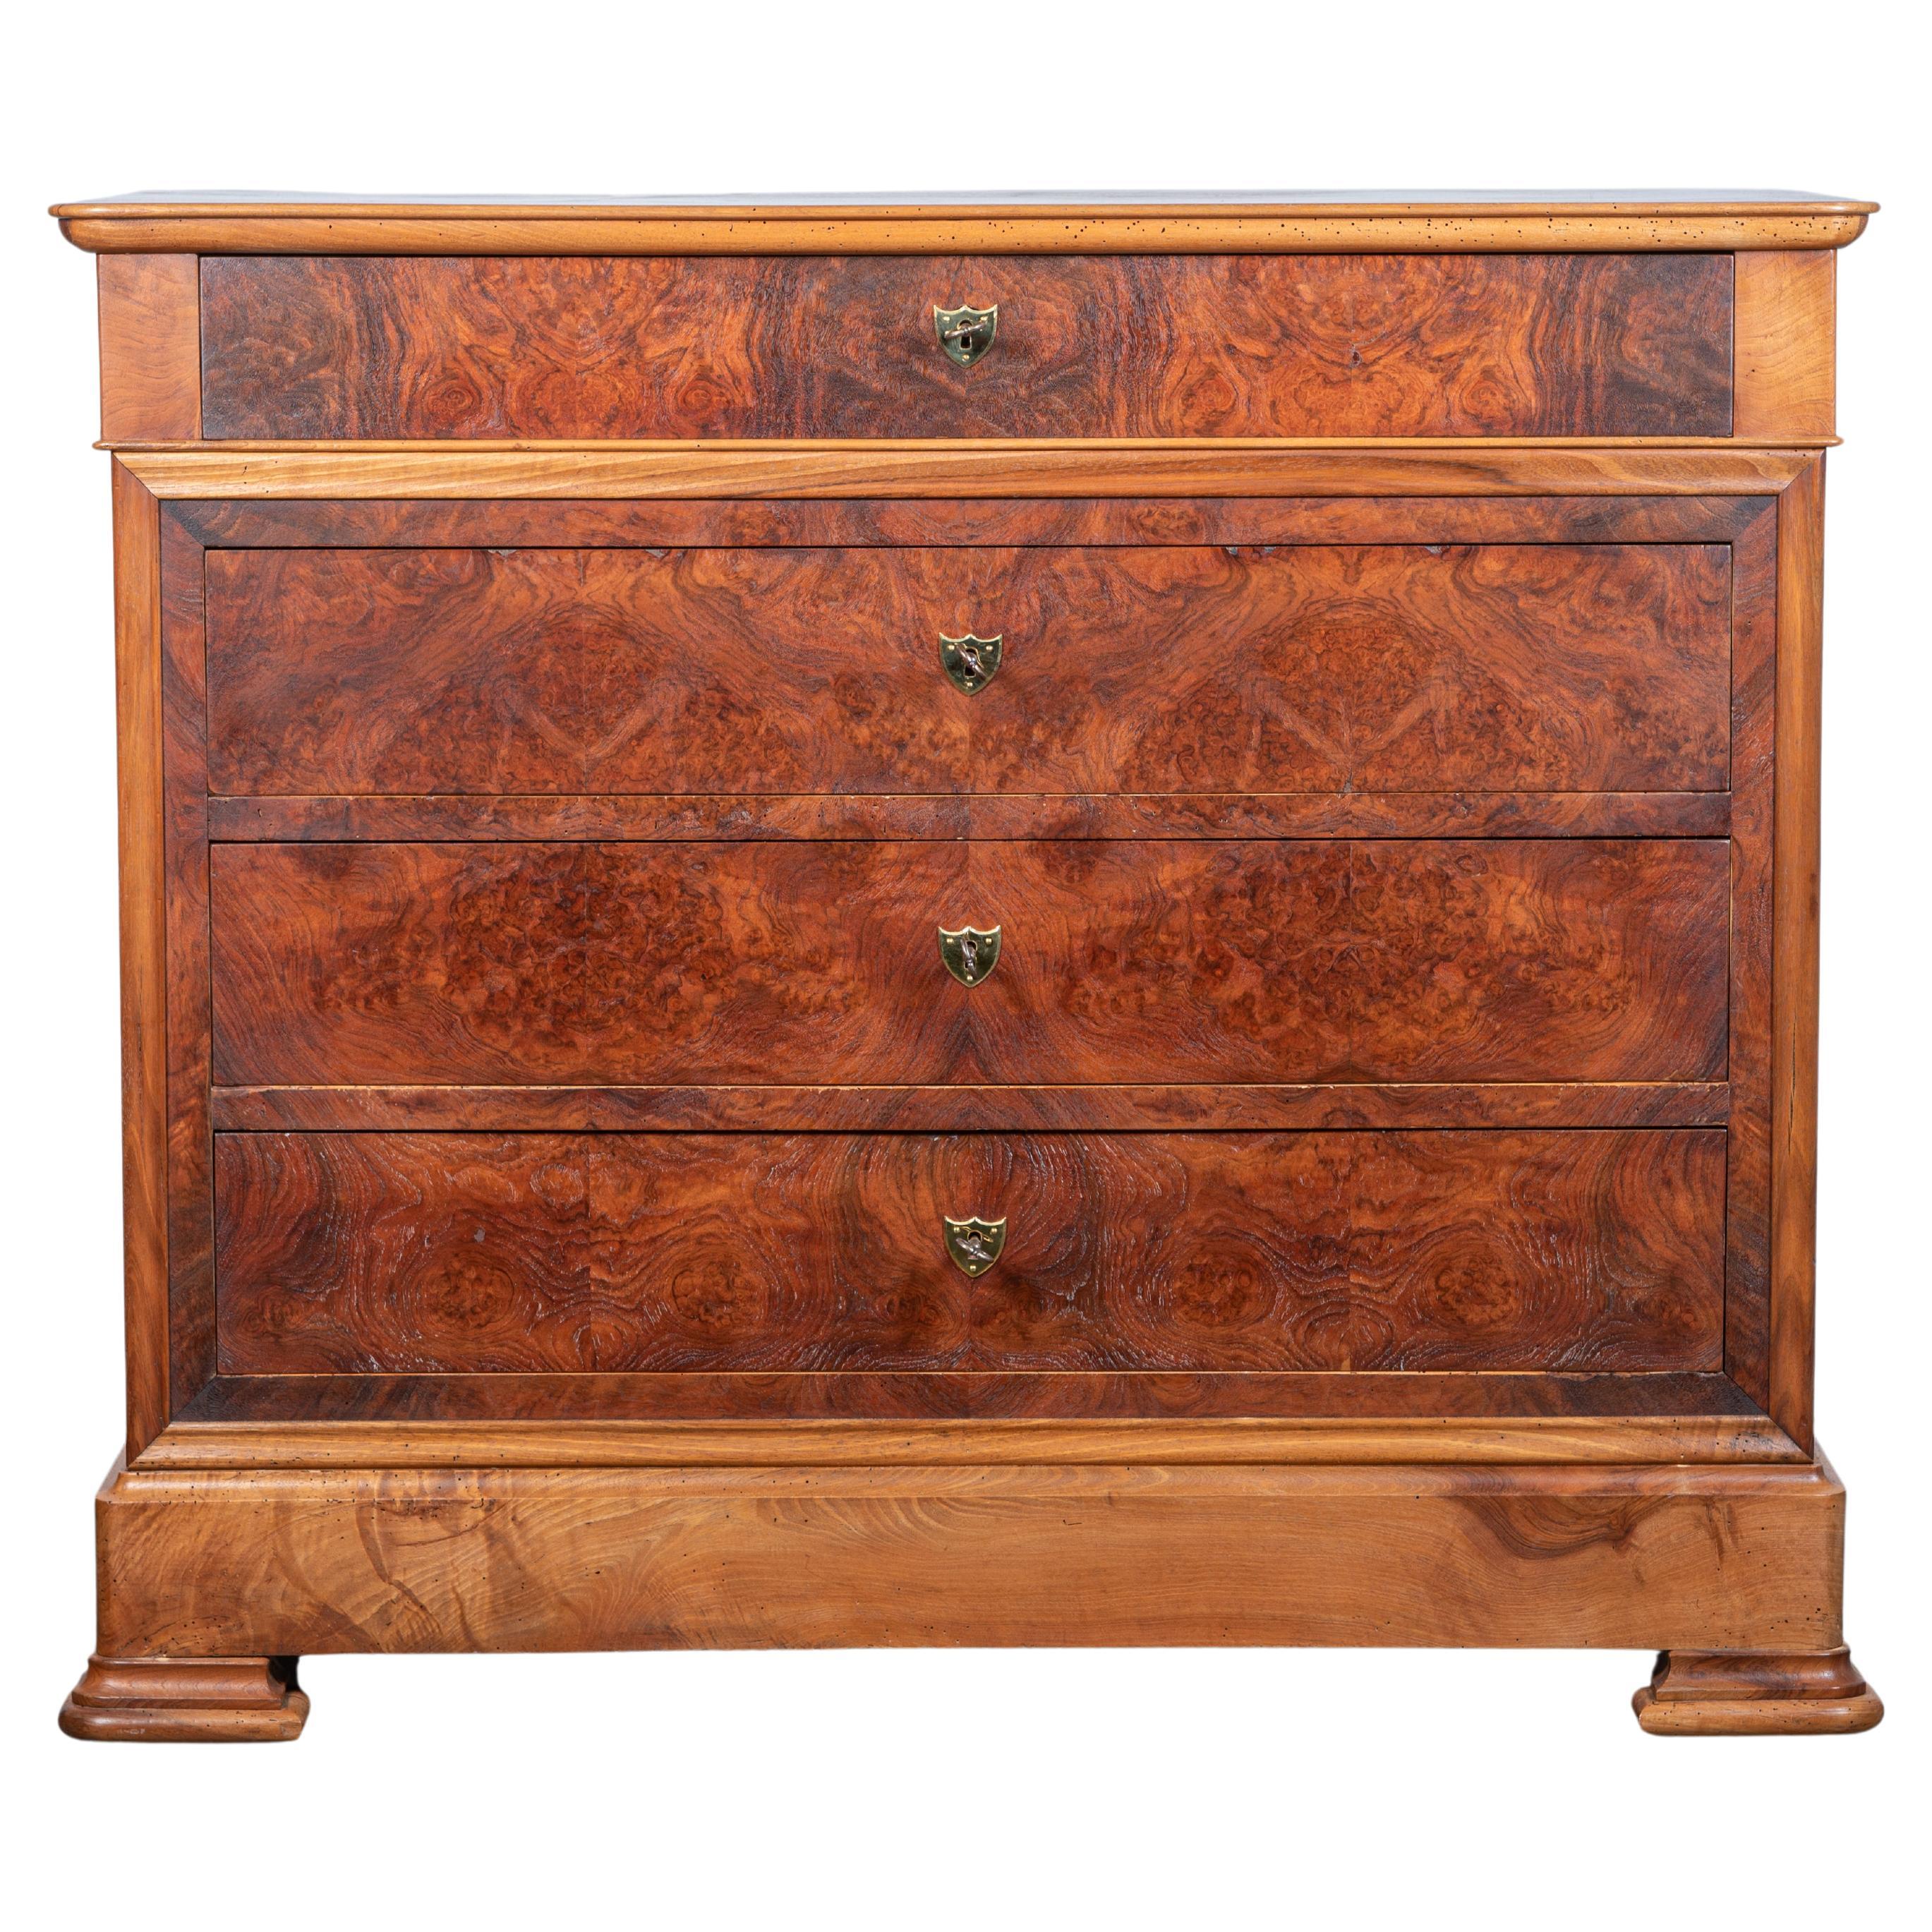 19th Century French Louis Philippe Burl Walnut Commode